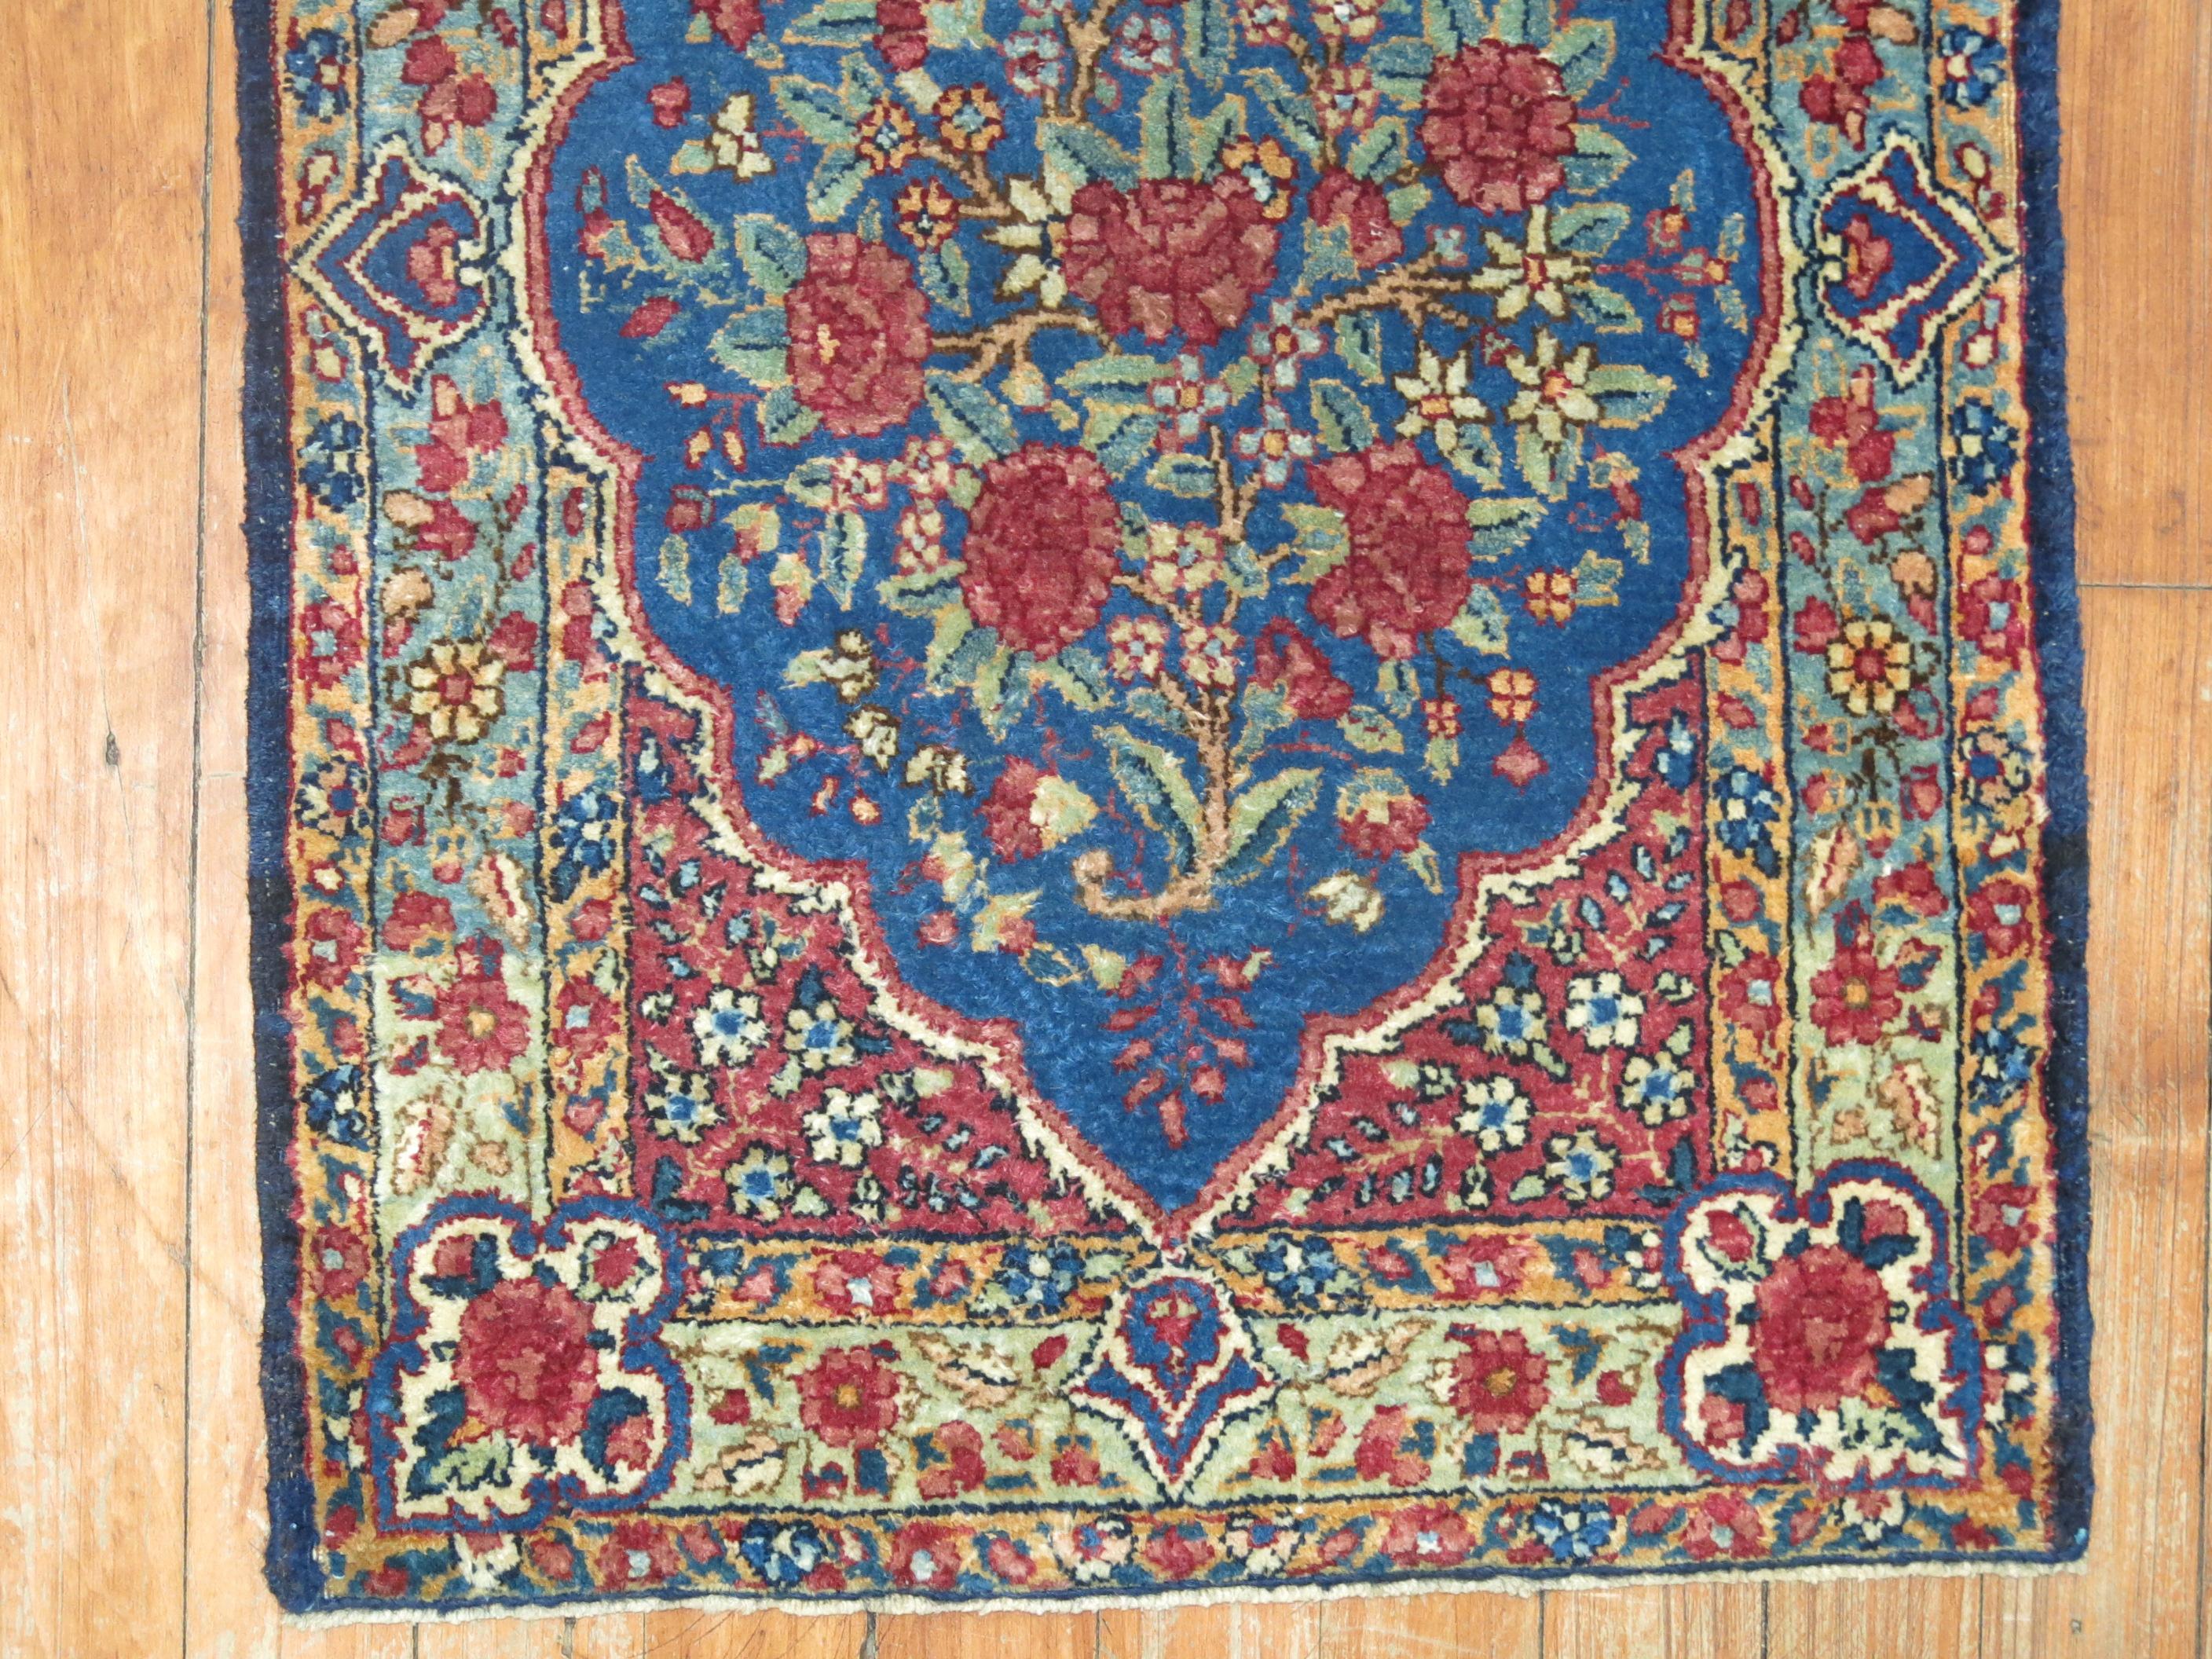 An early 20th century Persian Lavar Kerman traditional mat size rug.

Measures: 1'6